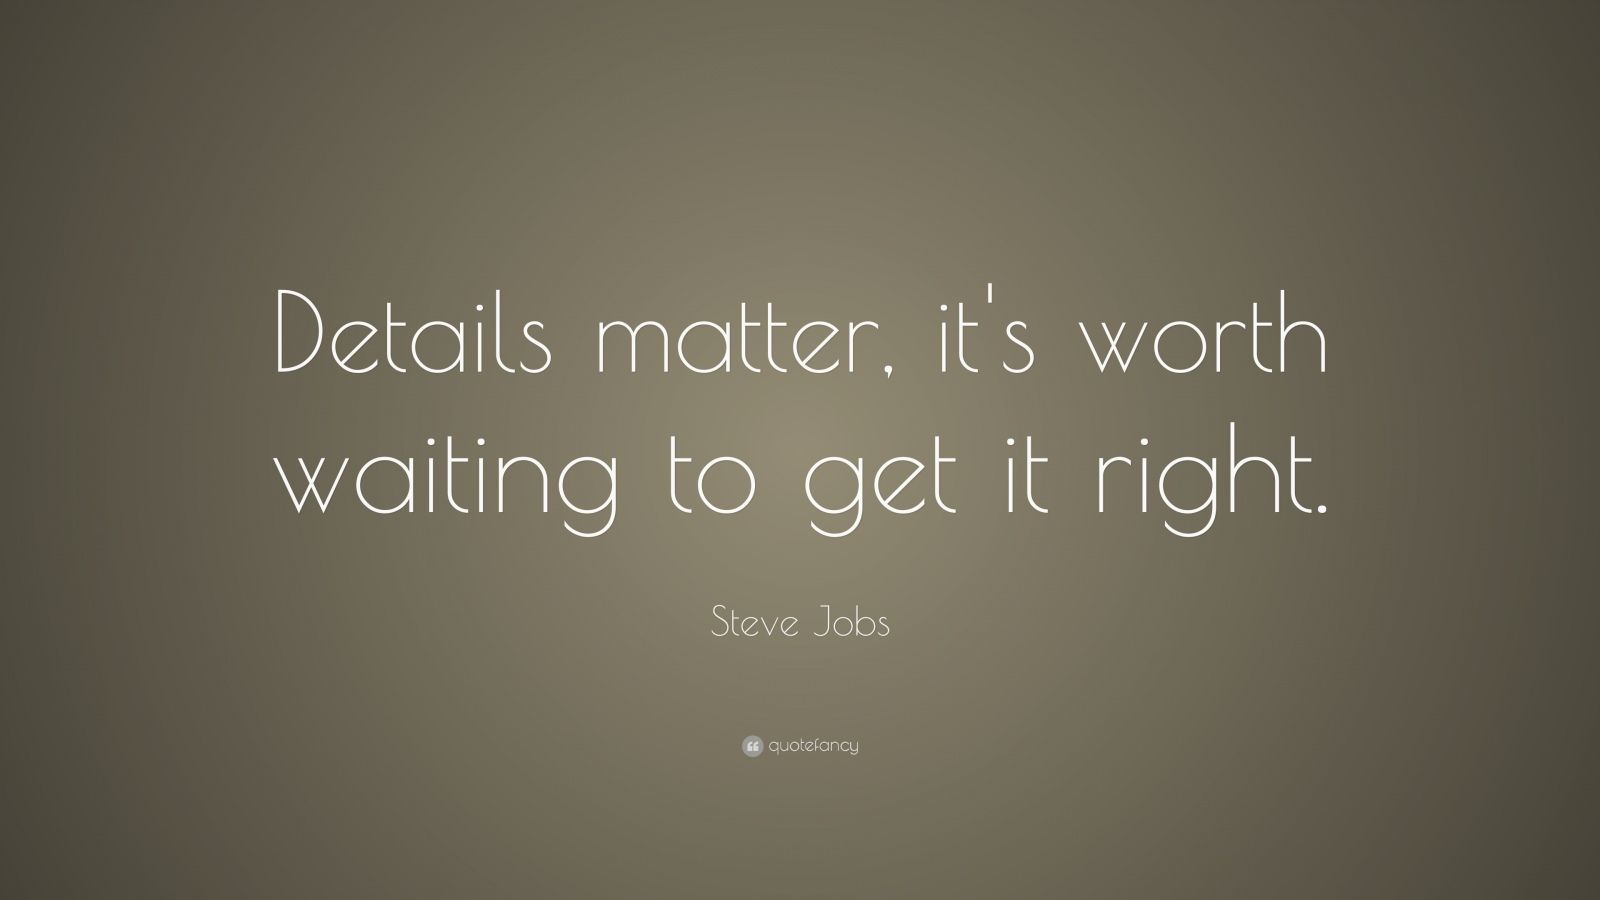 "details matter, it"s worth waiting to get it right.